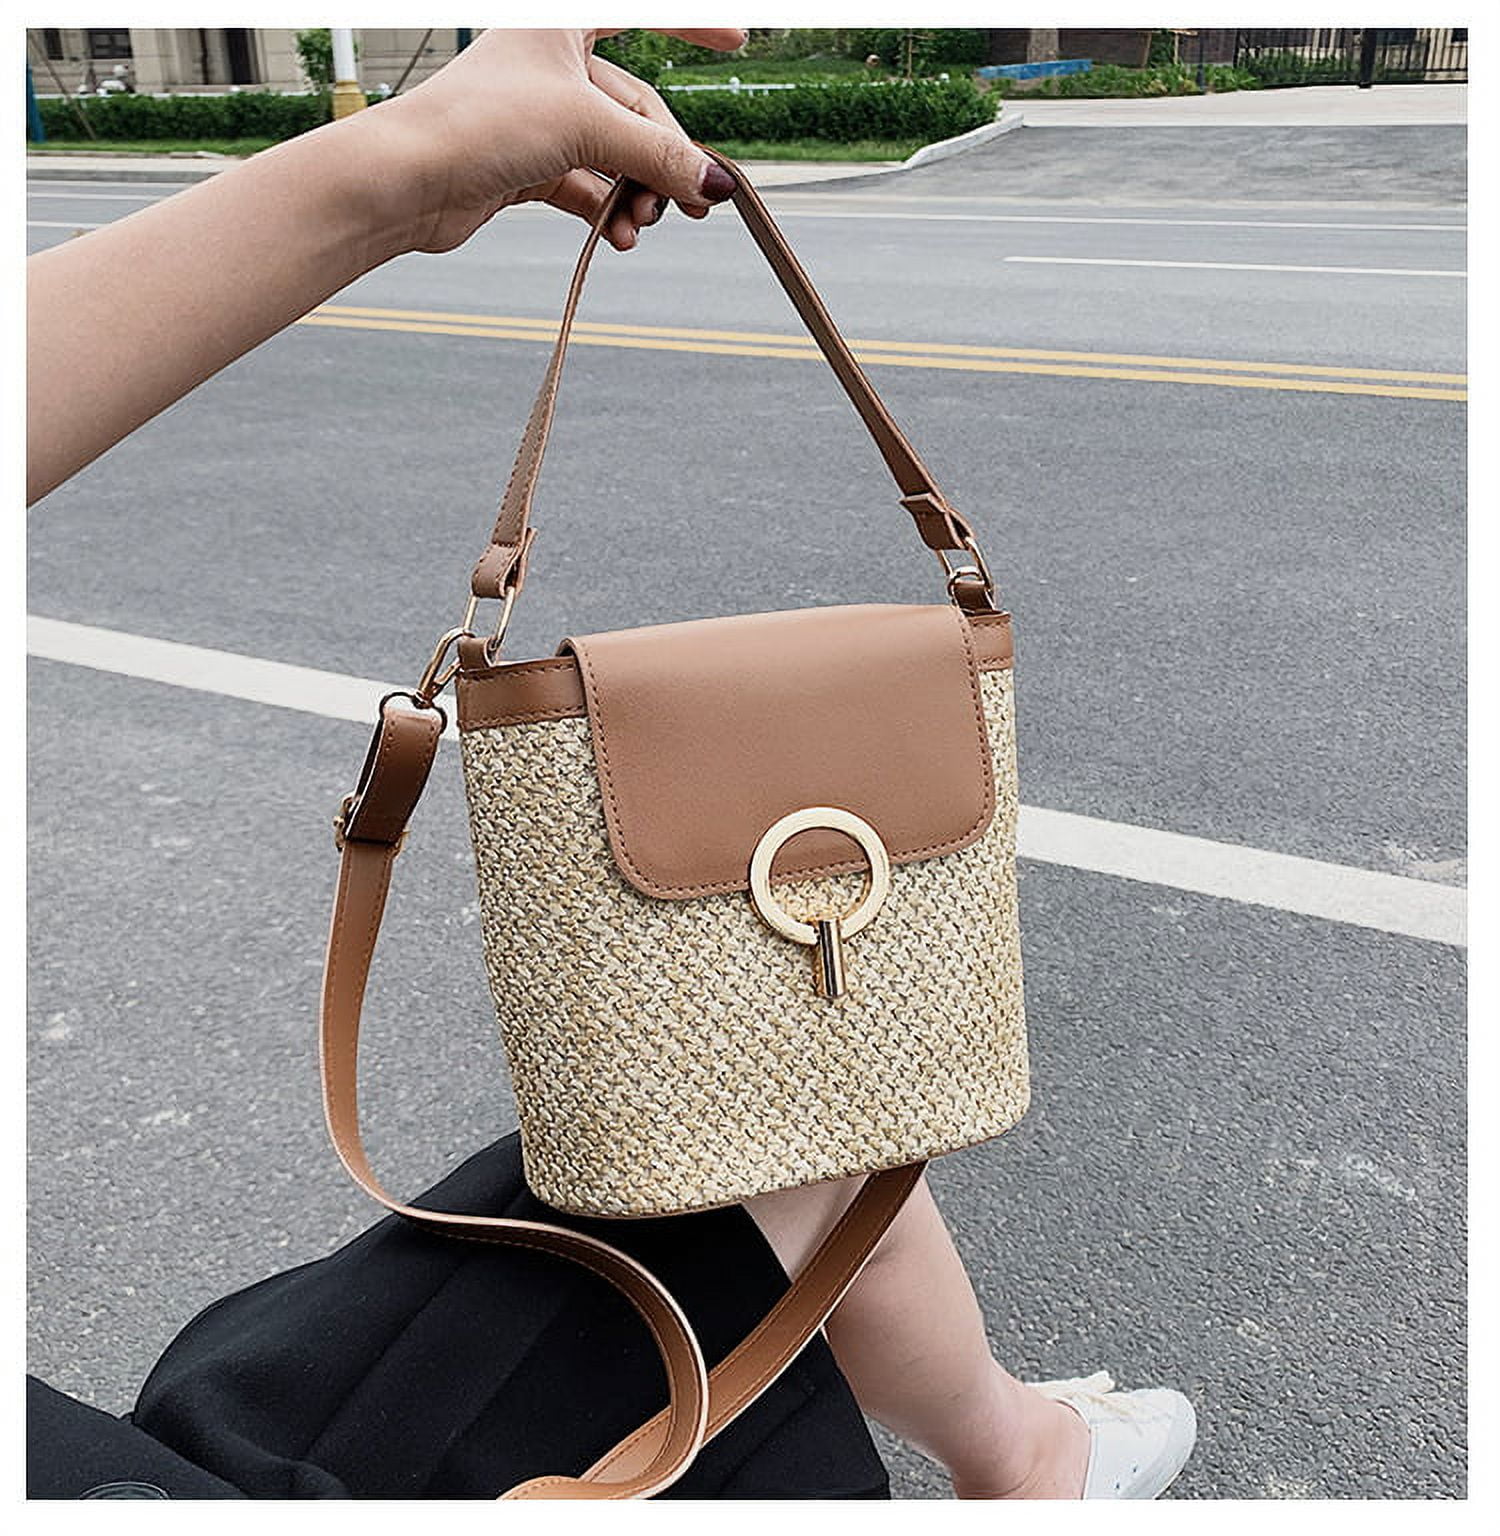 Handbag for Women, GMYLE PU Leather Shoulder Crossbody Tote Bucket Bag  Korean Style Fashion with 2 Removable Straps Design Wide, Gift for Mother  Wife